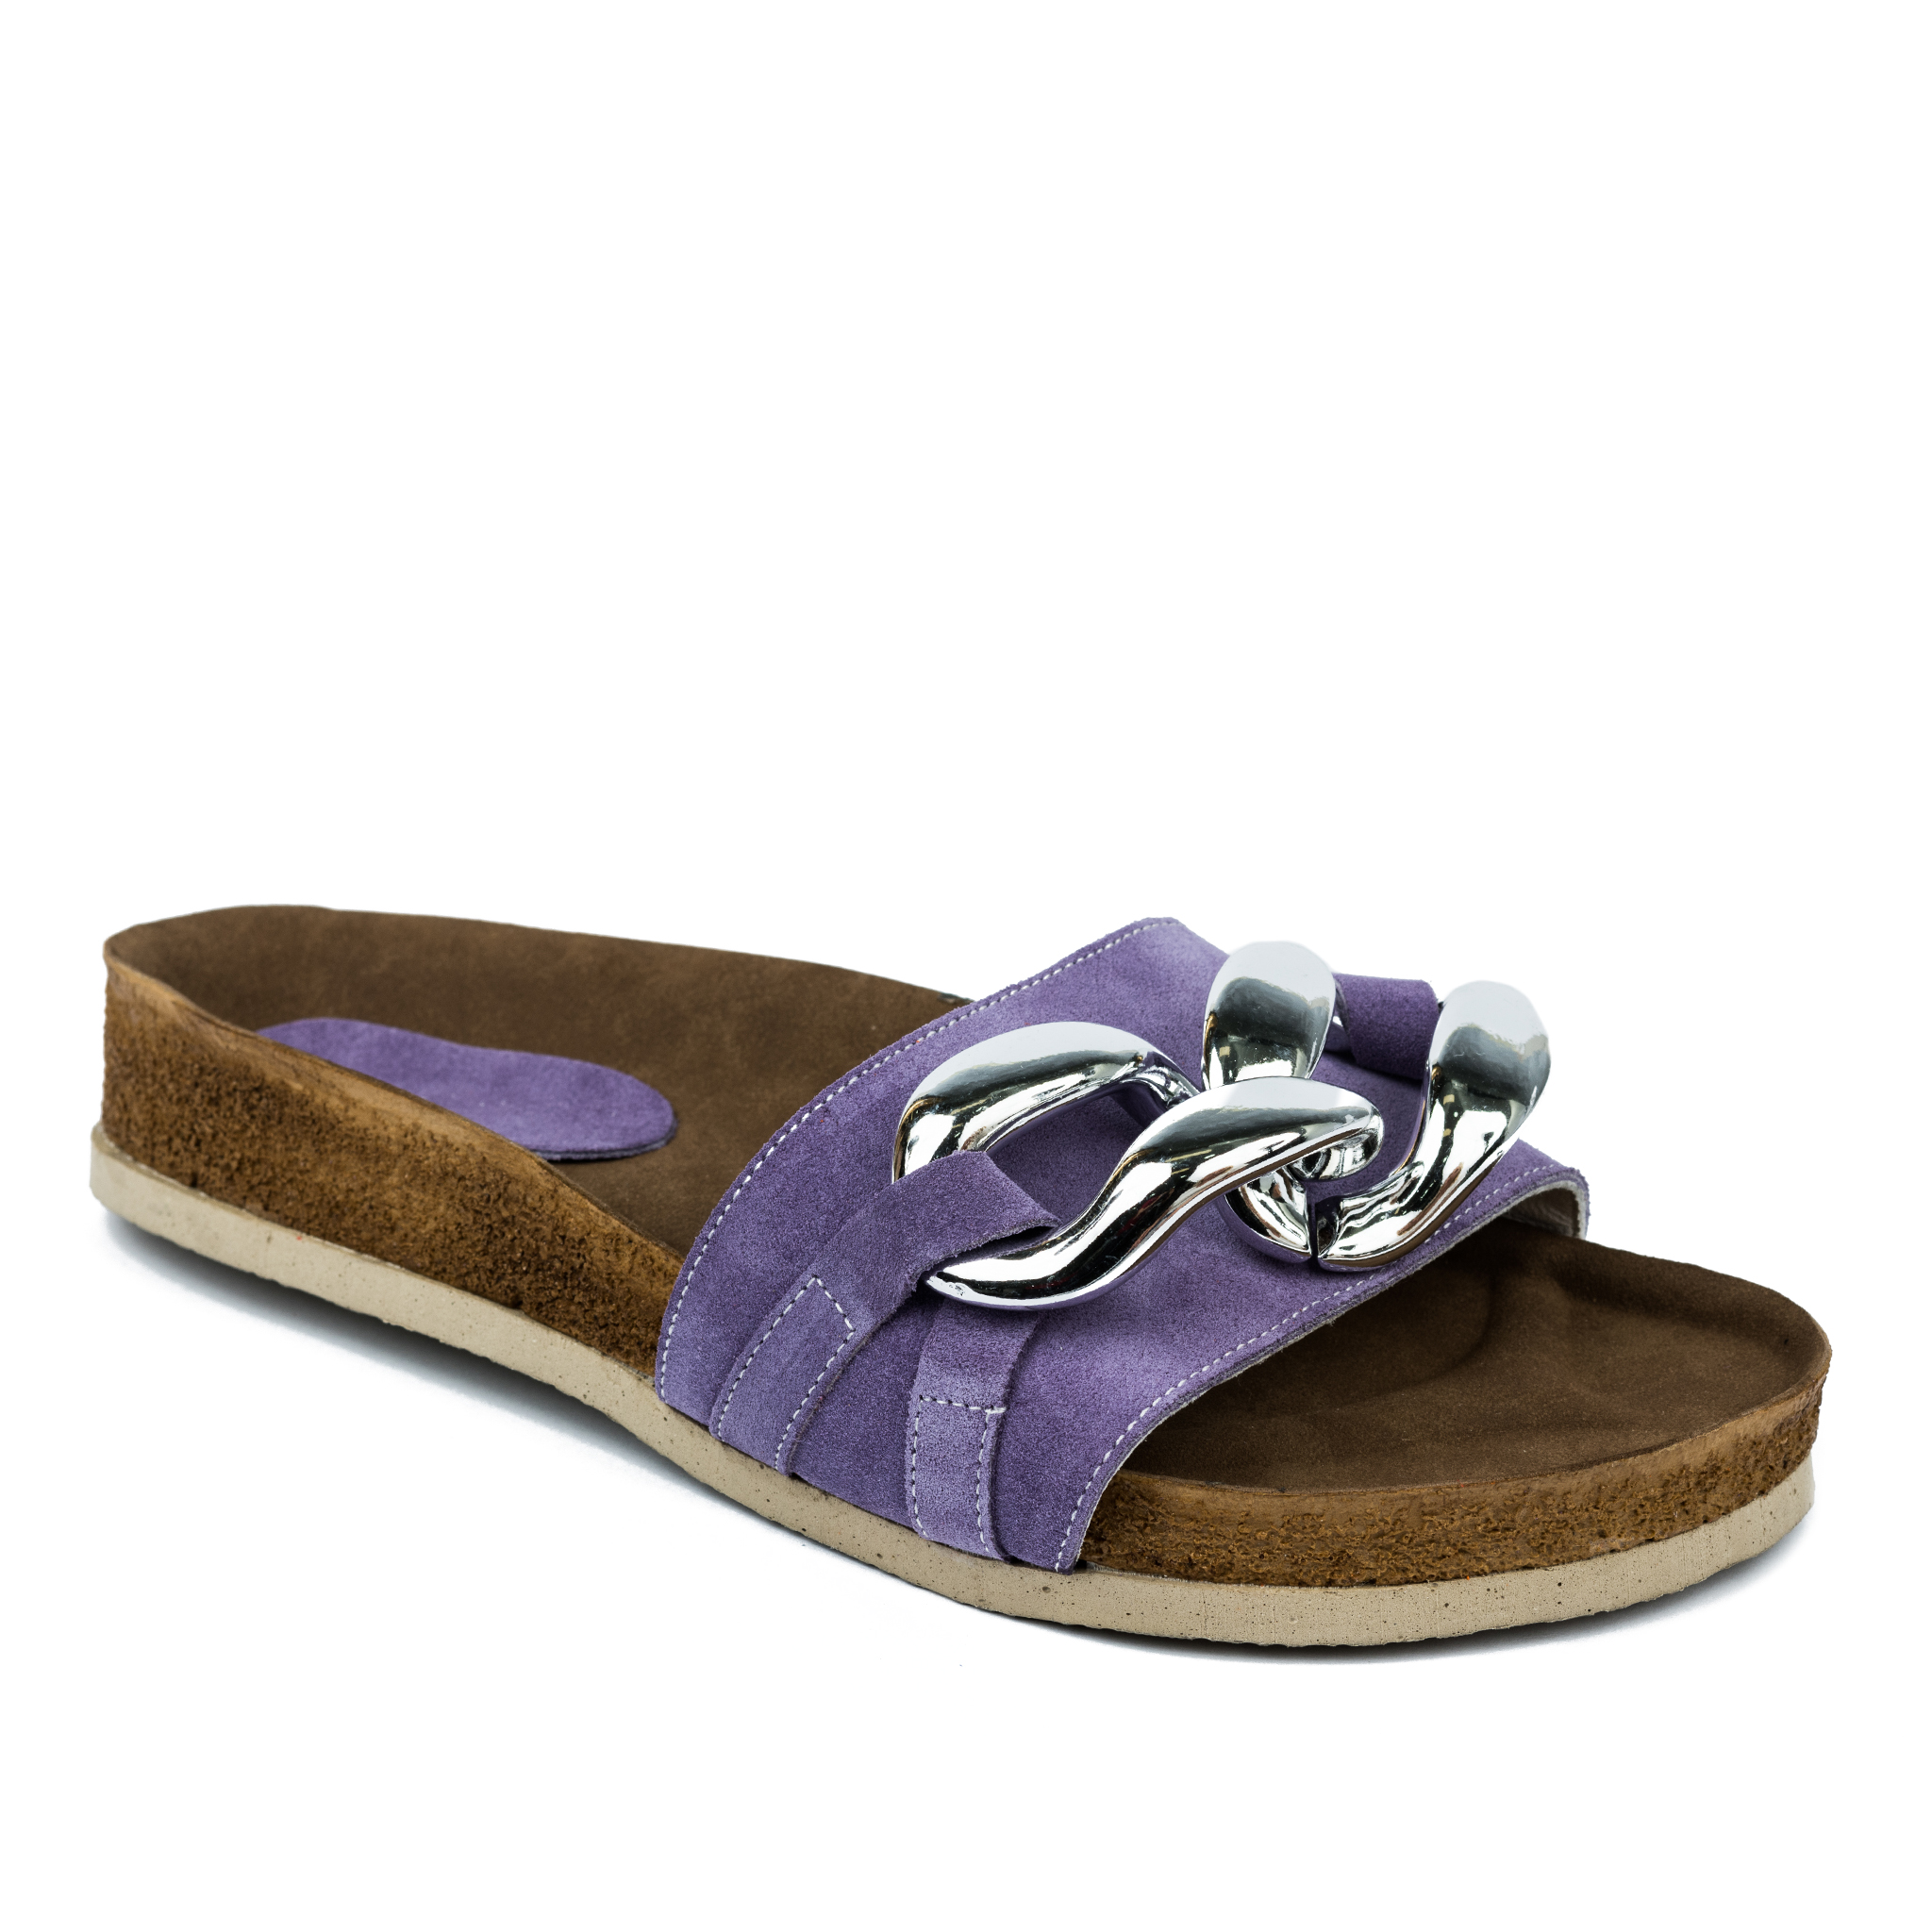 Leather slippers MANALI - VIOLET